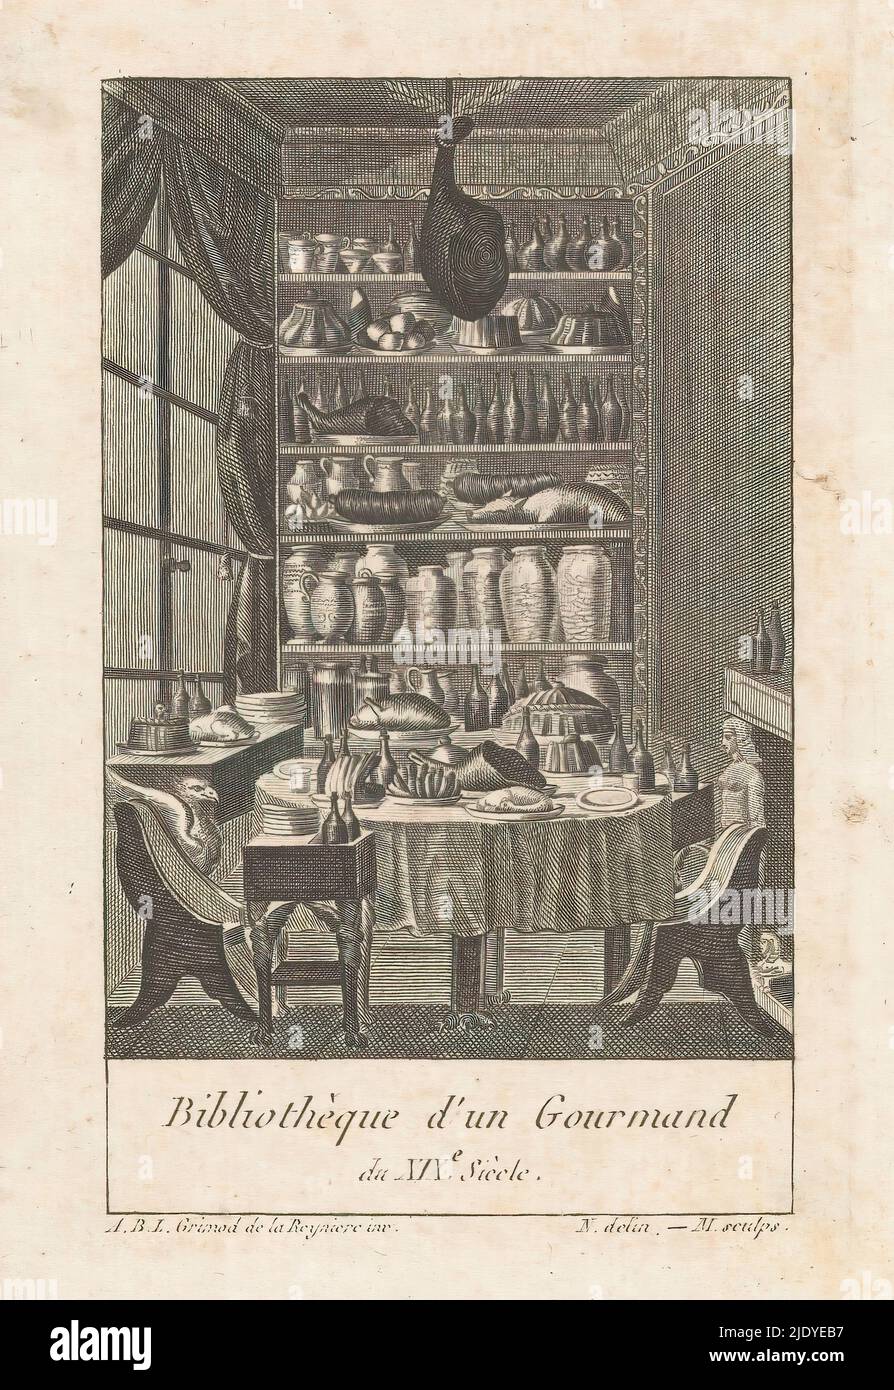 Library filled with food, Title page for: Grimod de la Reynière, Almanch des Gourmands, 1803, Bibliothèque d'un Gourmand du XIXe Siècle (title on object), Interior with a richly laid table, foodstuffs on the shelves of the bookcase and a ham as a chandelier., print maker: Monogrammist M (19e eeuw), (mentioned on object), after drawing by: Monogrammist N (19e eeuw), (mentioned on object), after design by: Alexandre Balthazar Laurent Grimod de La Reynière, (mentioned on object), Paris, 1803, paper, engraving, height 140 mm × width 103 mm Stock Photo